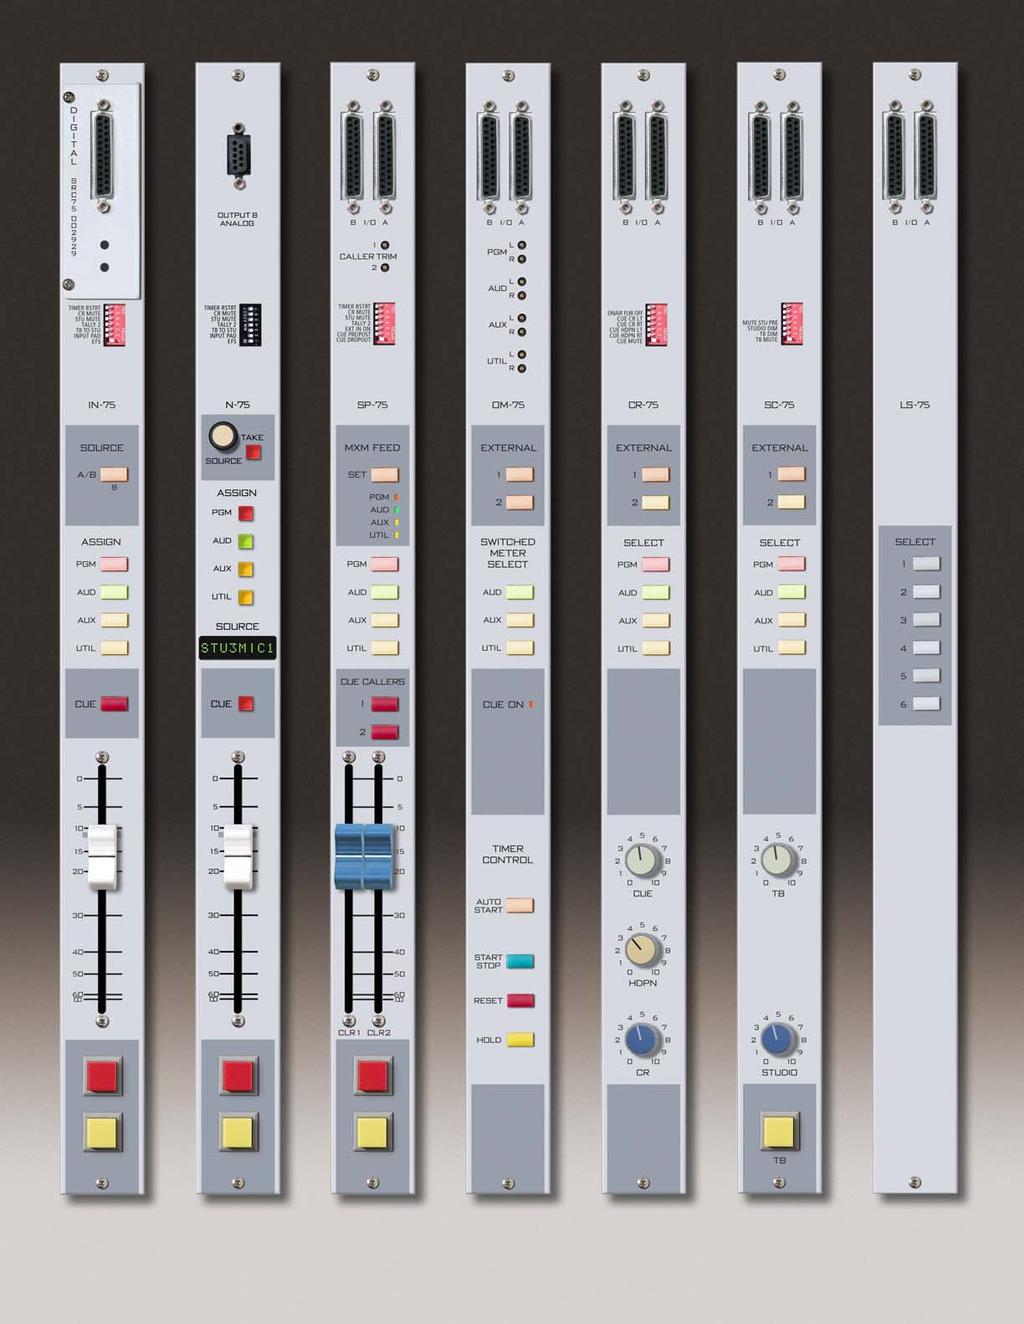 INPUT NETWORK PHONE OUTPUT CR STUDIO LINE SELECT Can be analog or digital depending on upper front panel submodule Only one channel shown; NET-75 panel consists of SIX faders Easy operation; caller